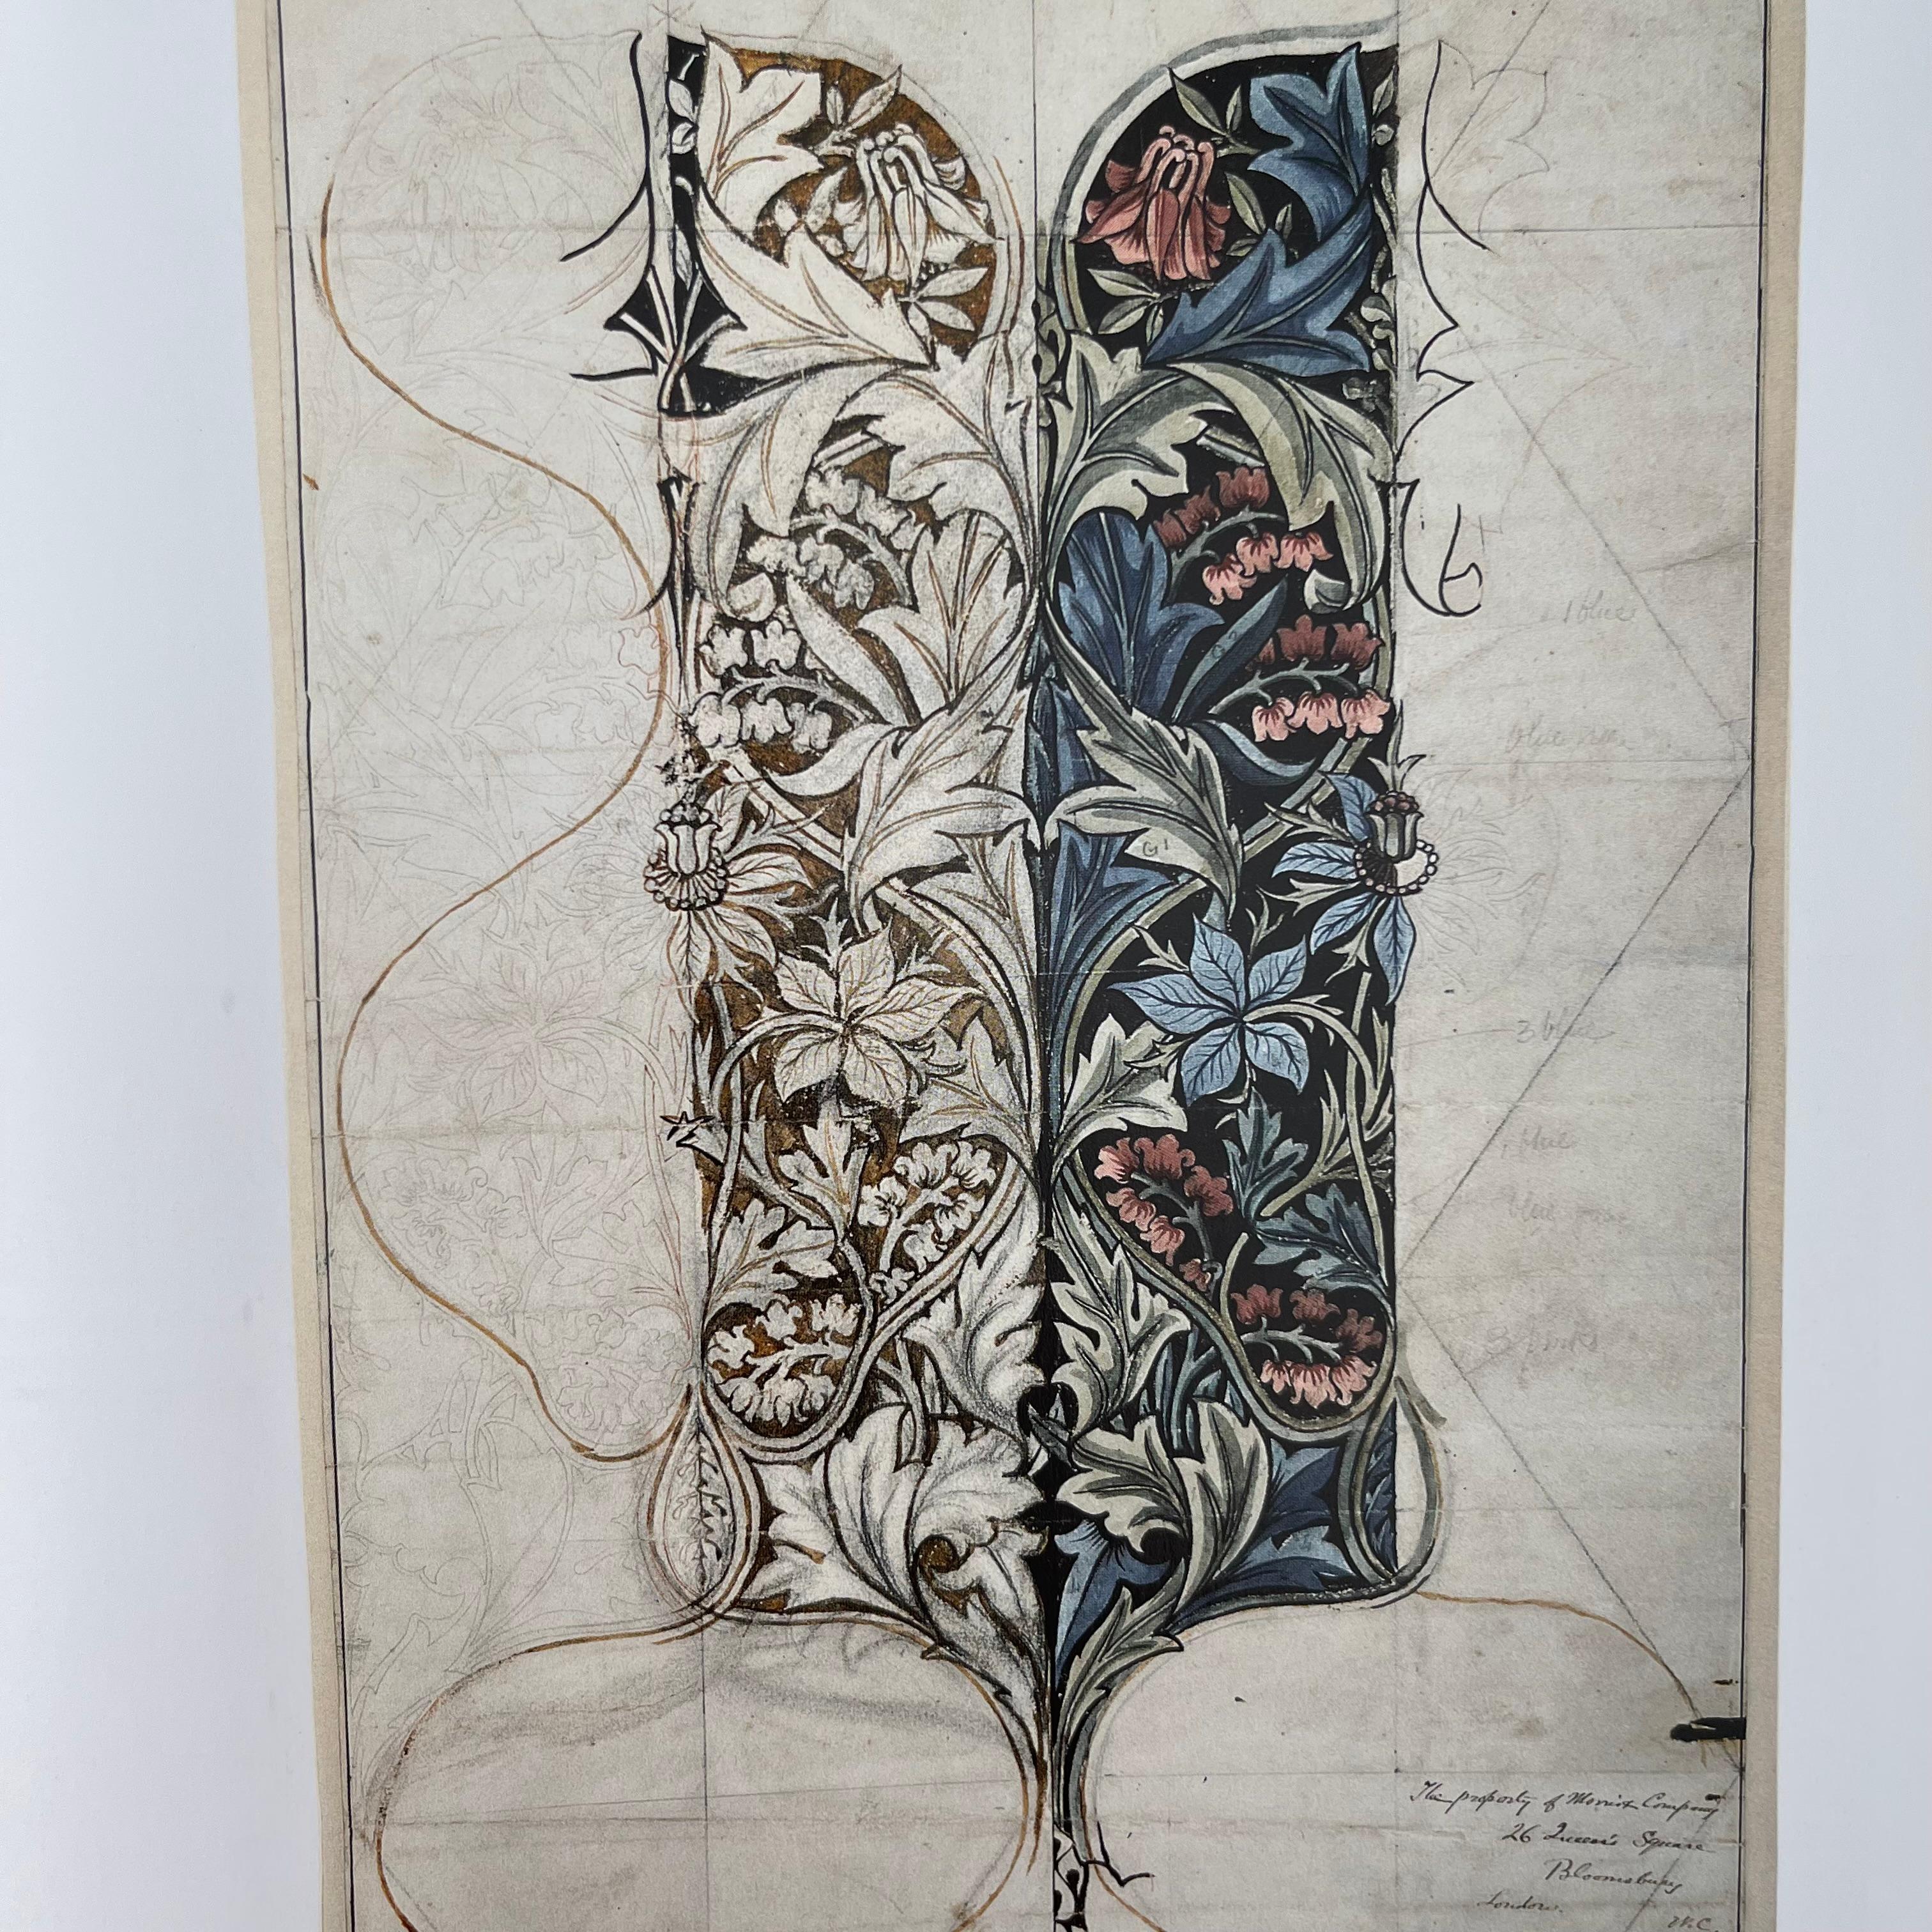 Published by the V&A to accompany the centenary exhibition on William Morris

Important reference book as this is the first comprehensive study to be published on William Morris 